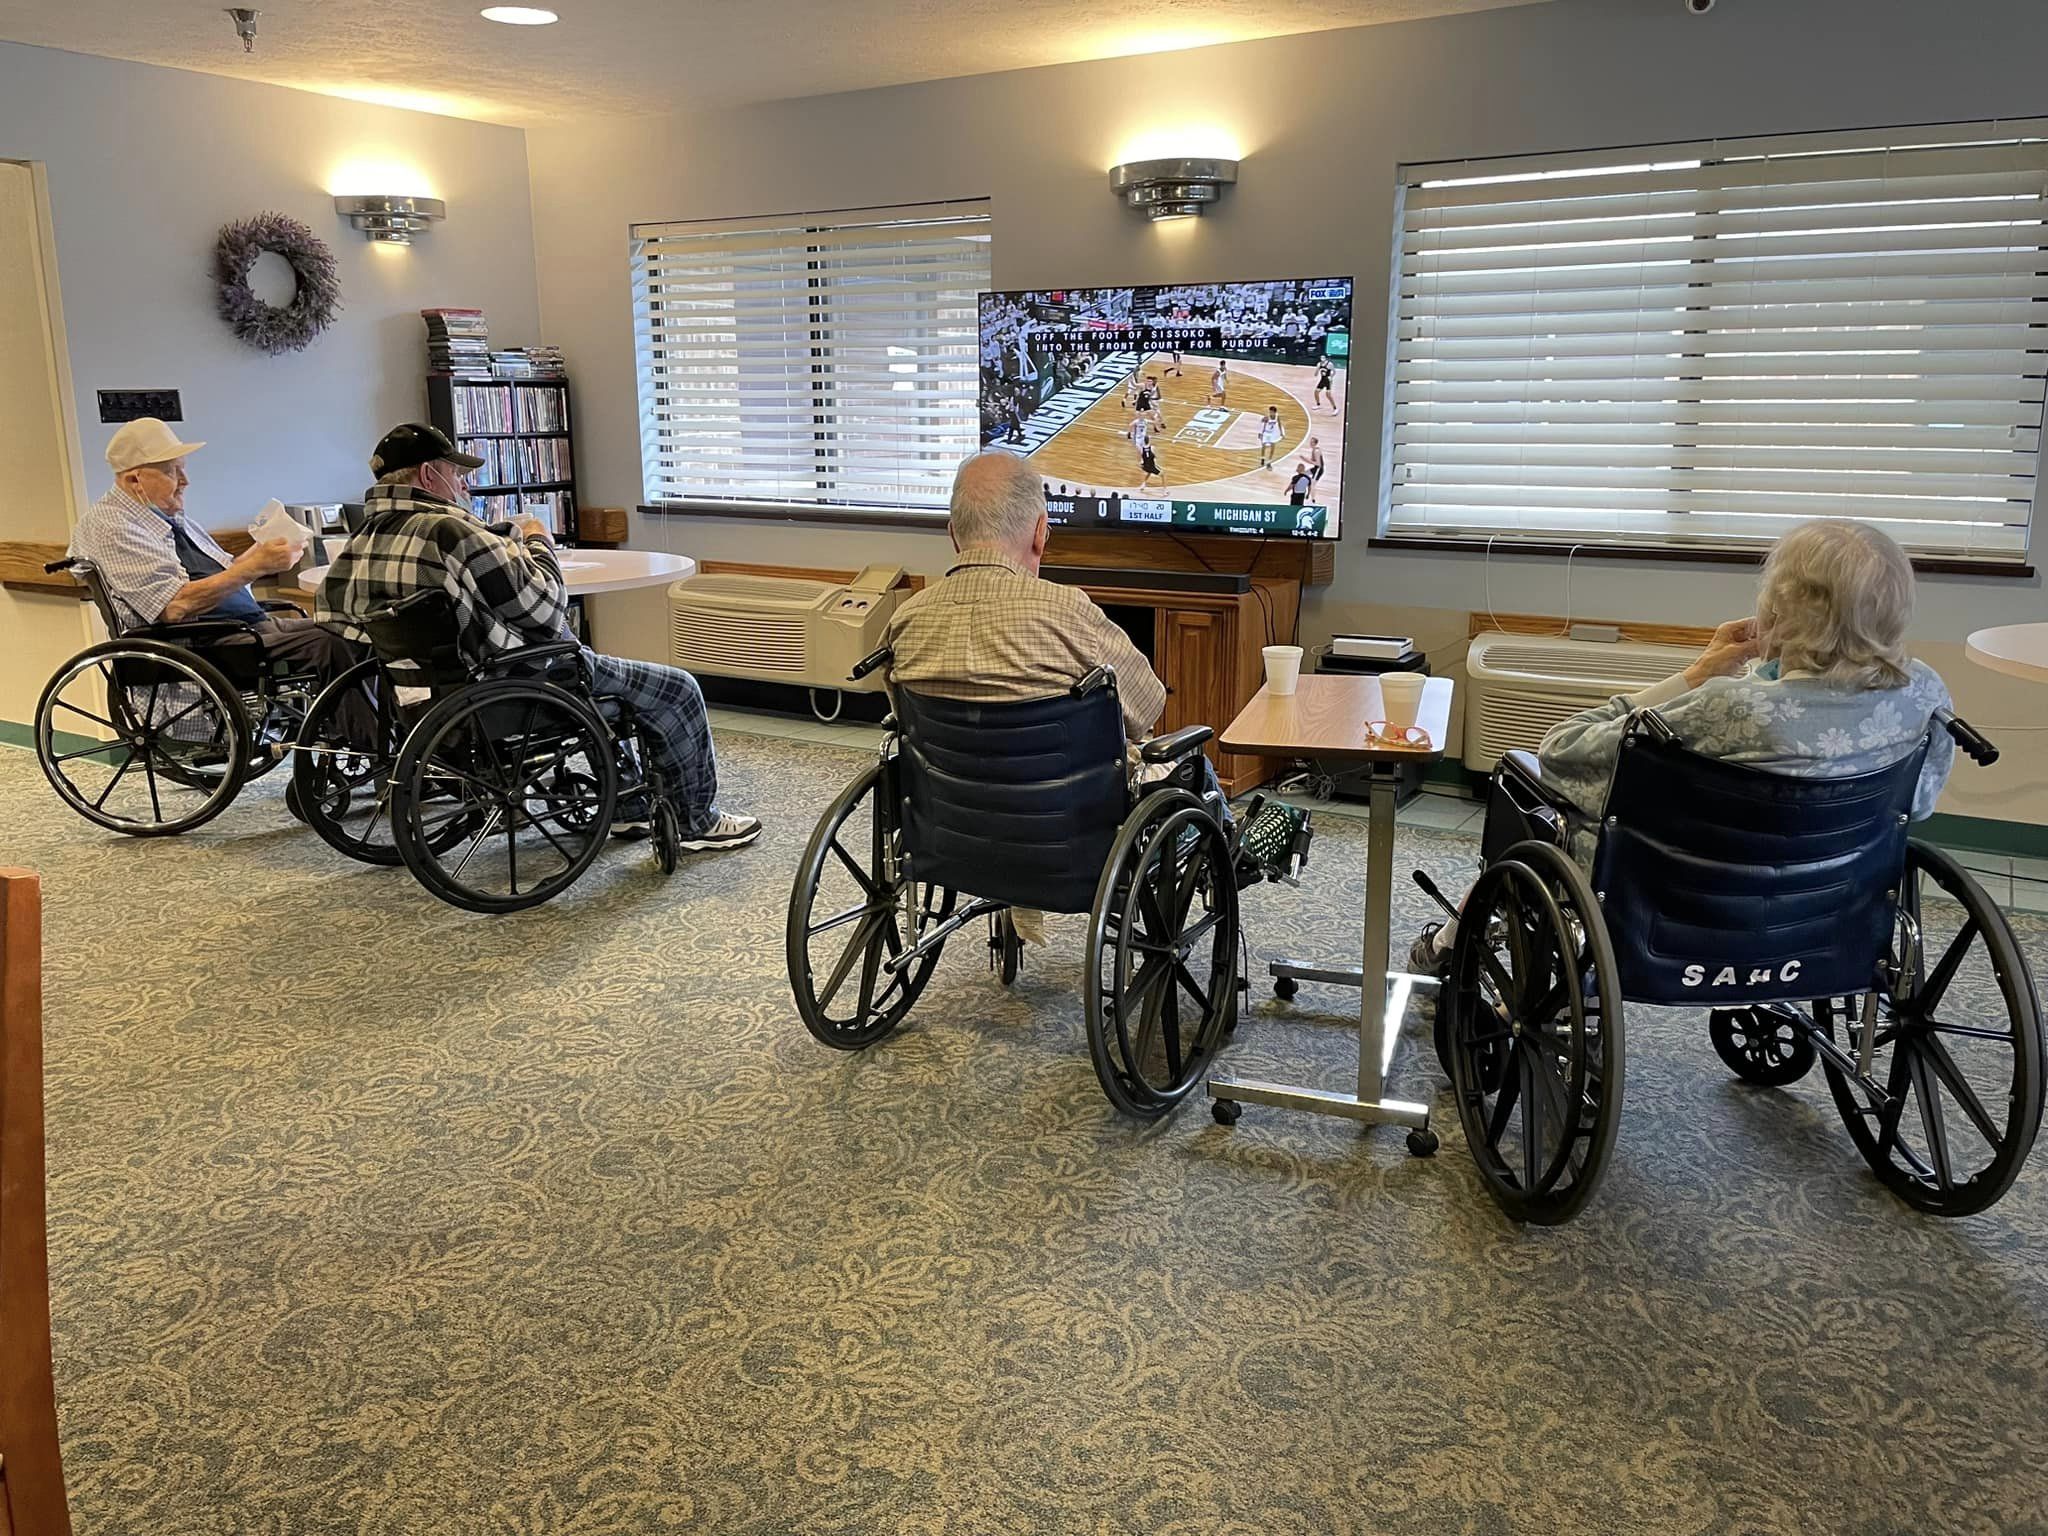 Our residents helped the Boilers to a VICTORY!